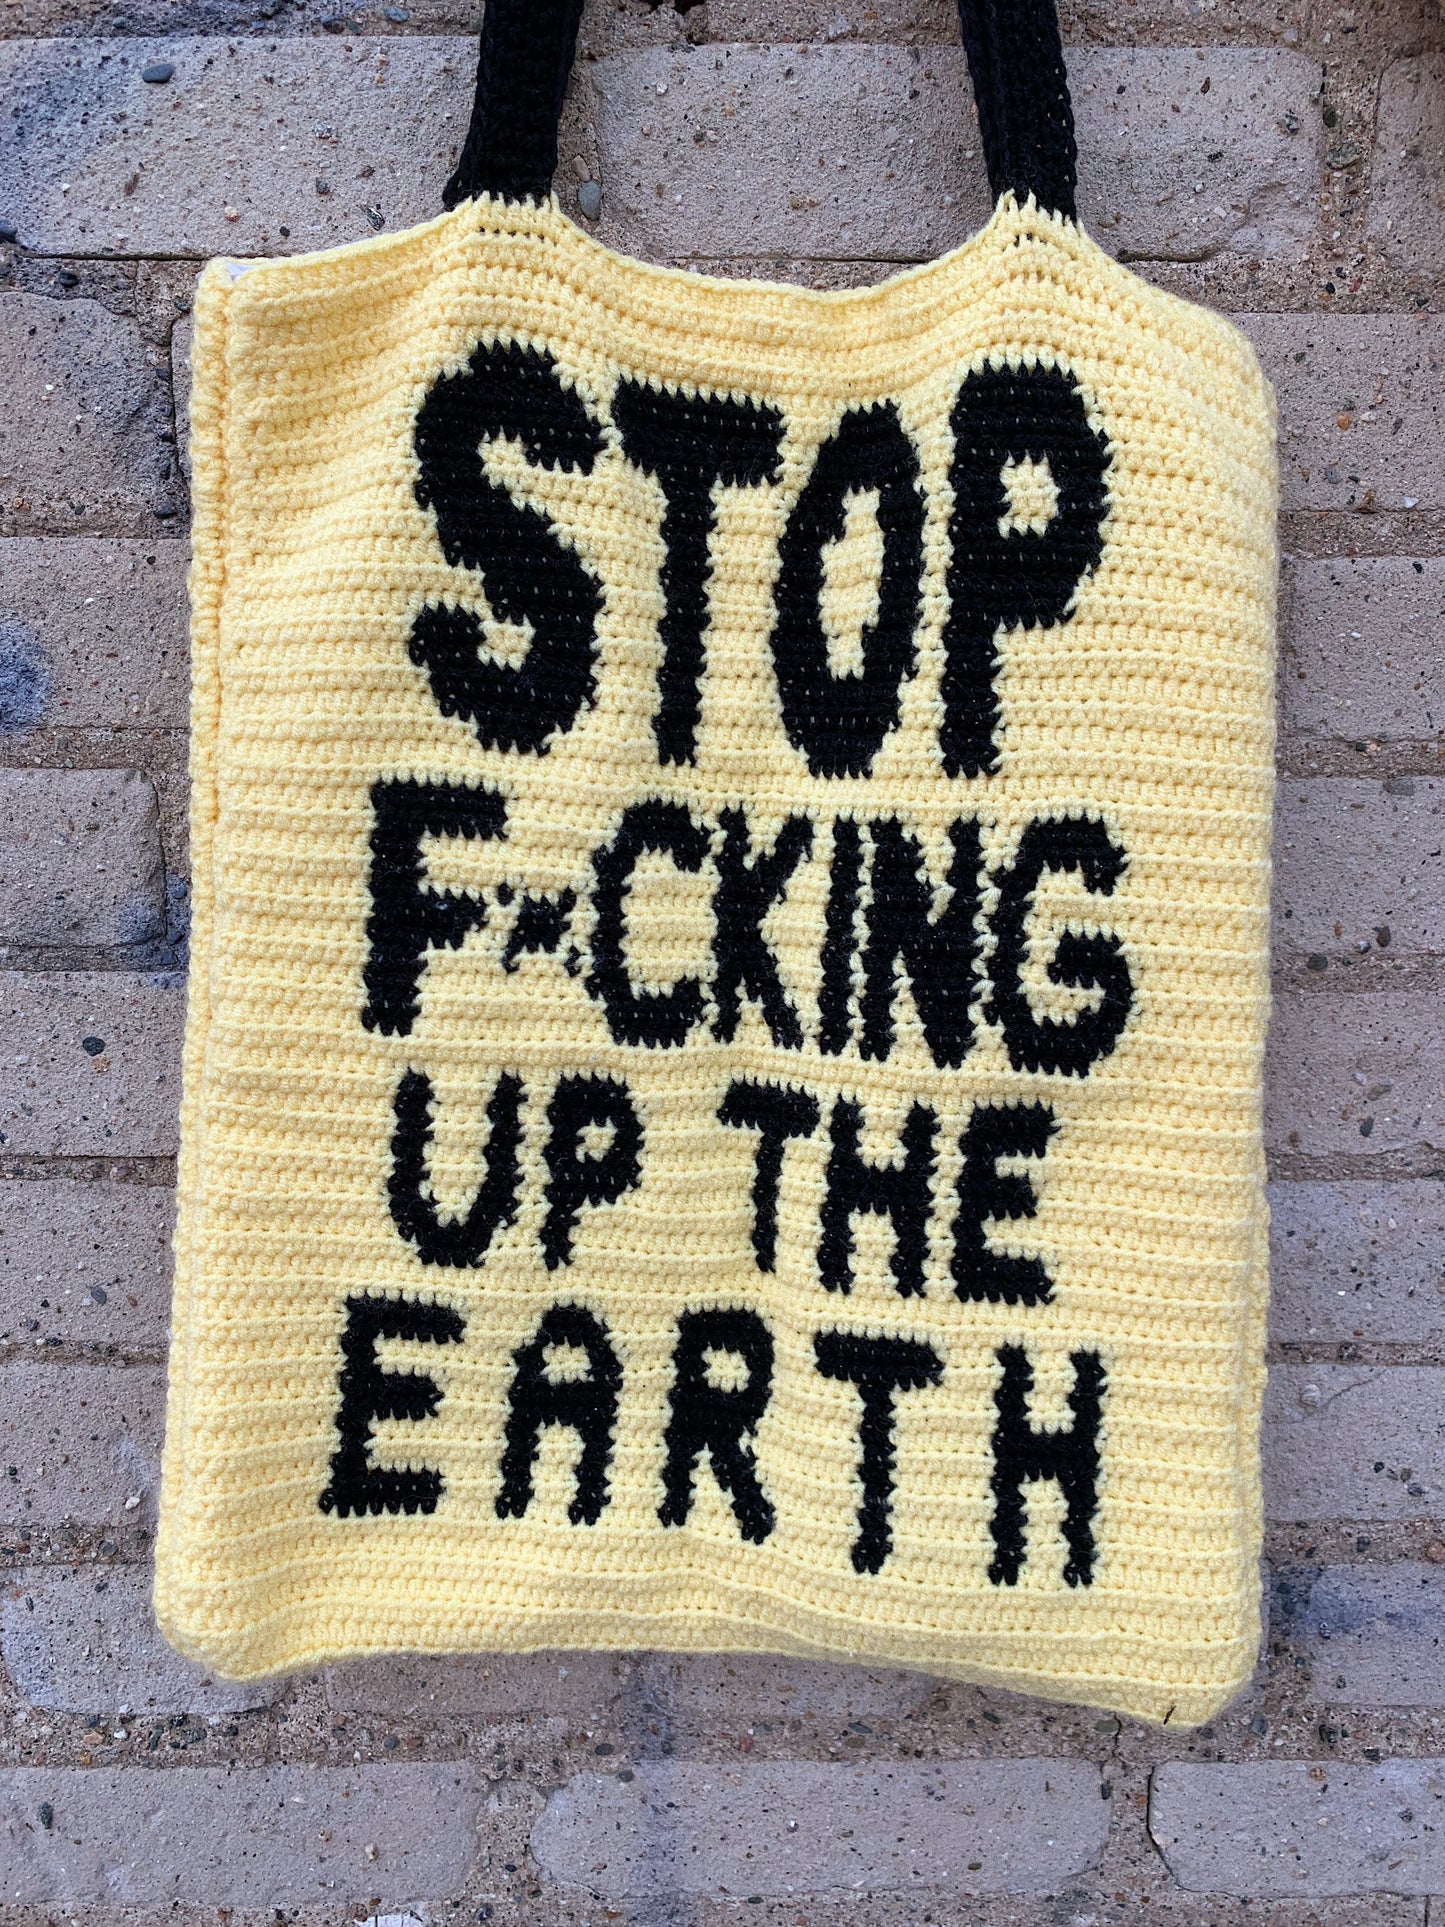 pattern: stop f*cking up the earth tote